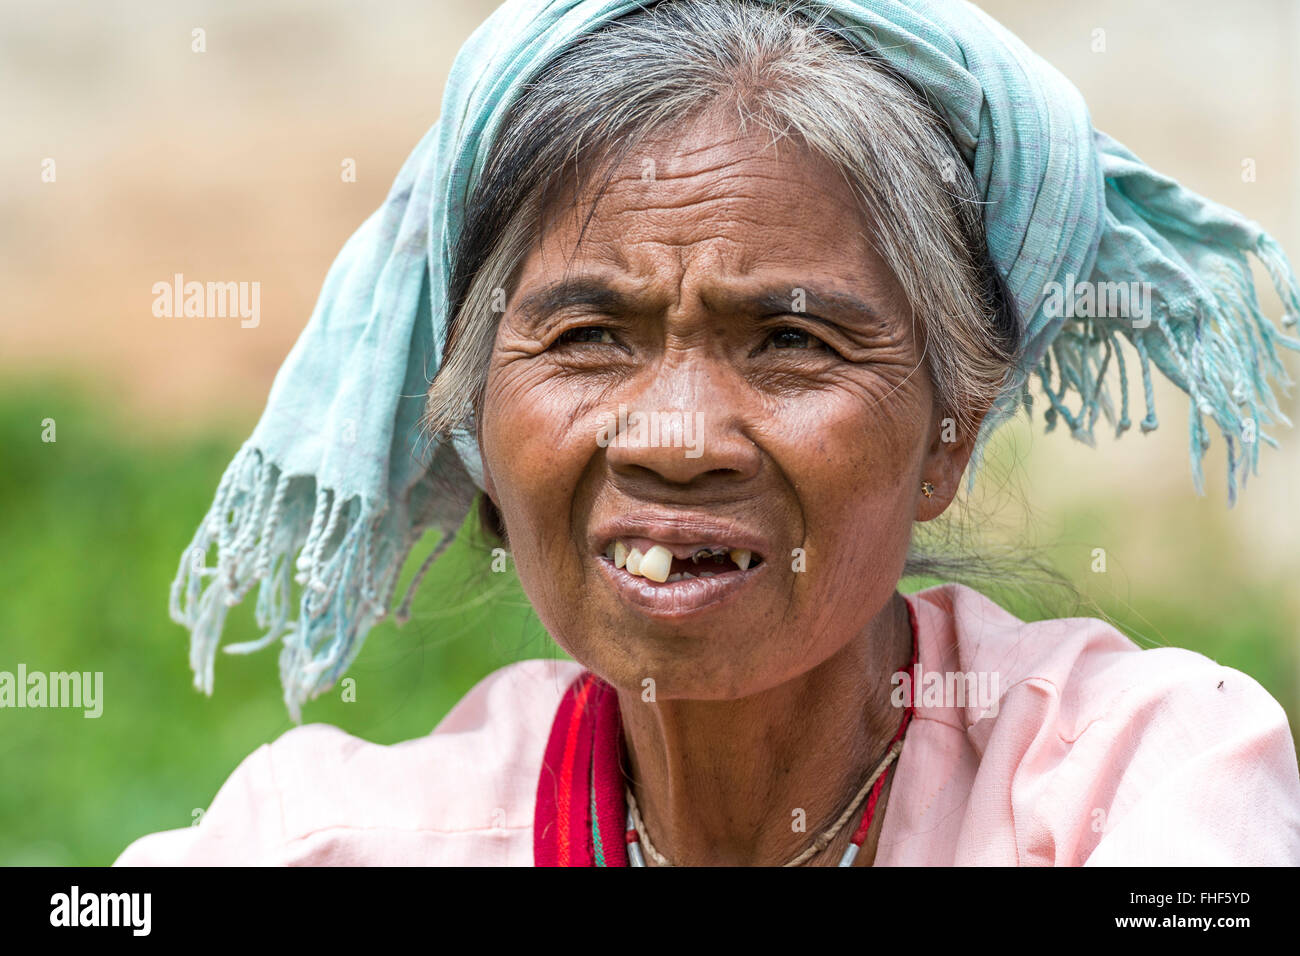 Woman from the Pao hilltribe or mountain people, portrait, Kalaw, Shan State, Myanmar, Burma, Myanmar Stock Photo